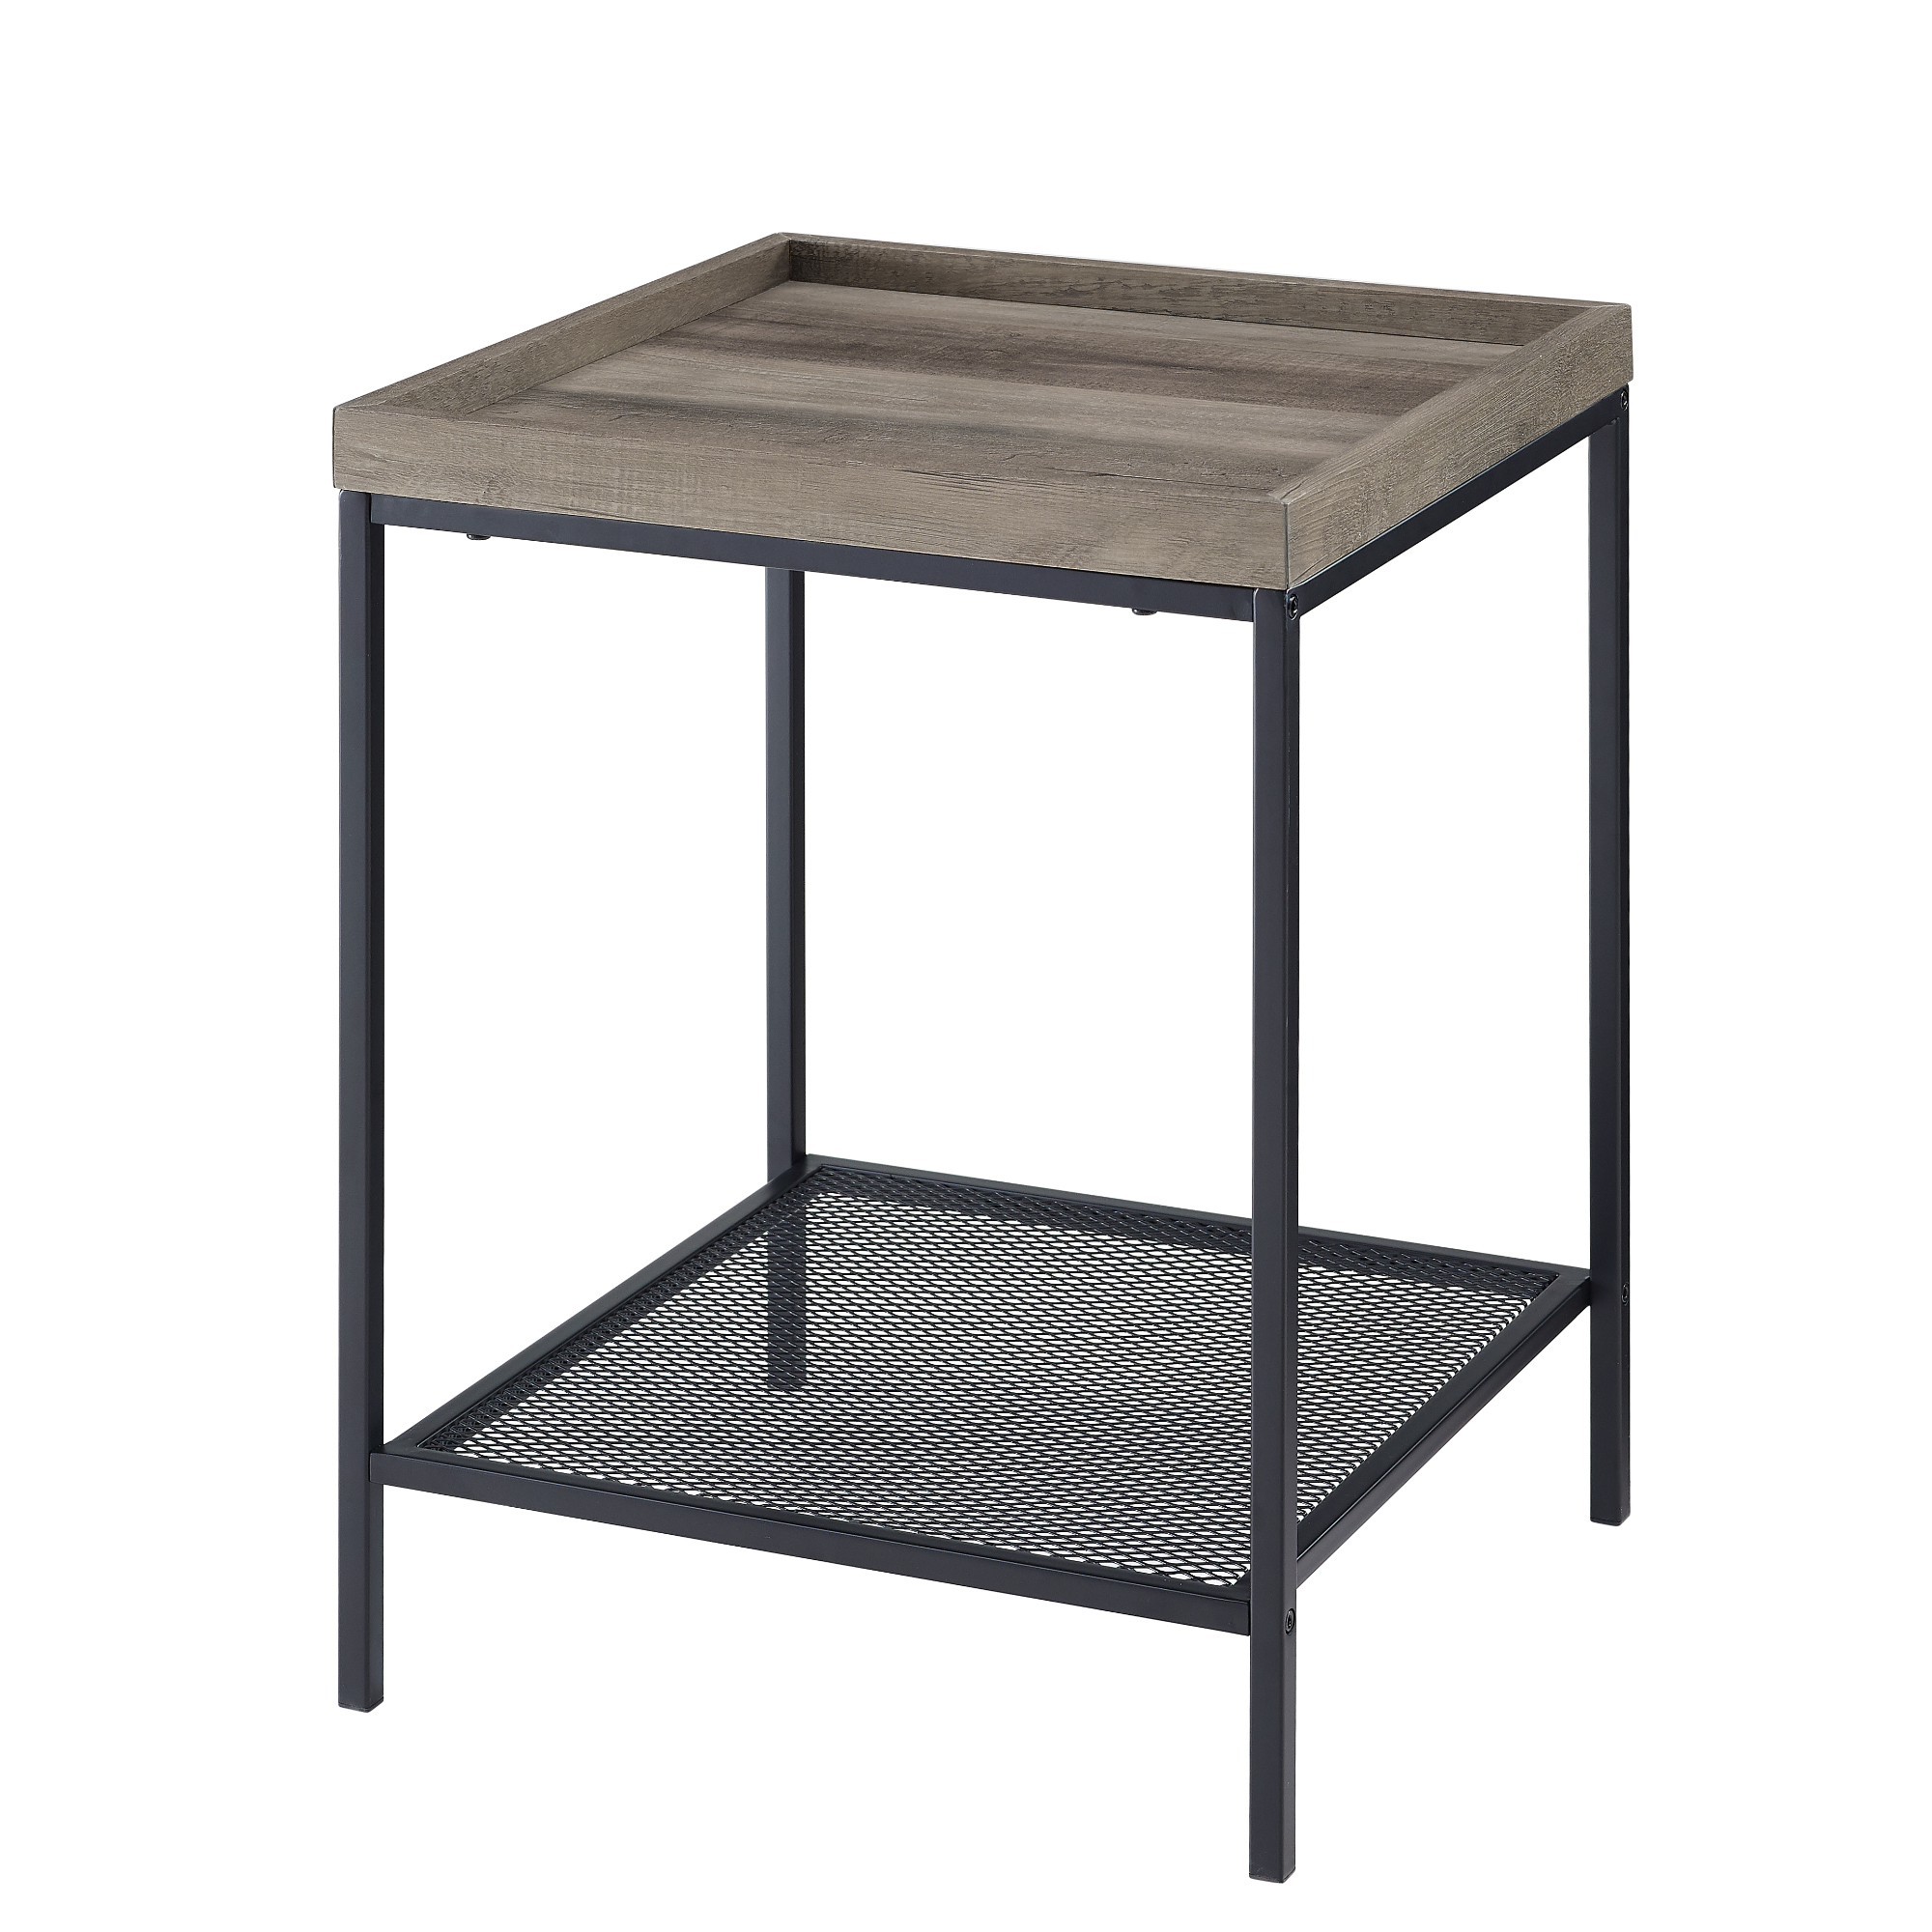 River Street Designs Frankie Metal and Wood Tray Top Grey Wash End Table - image 4 of 9